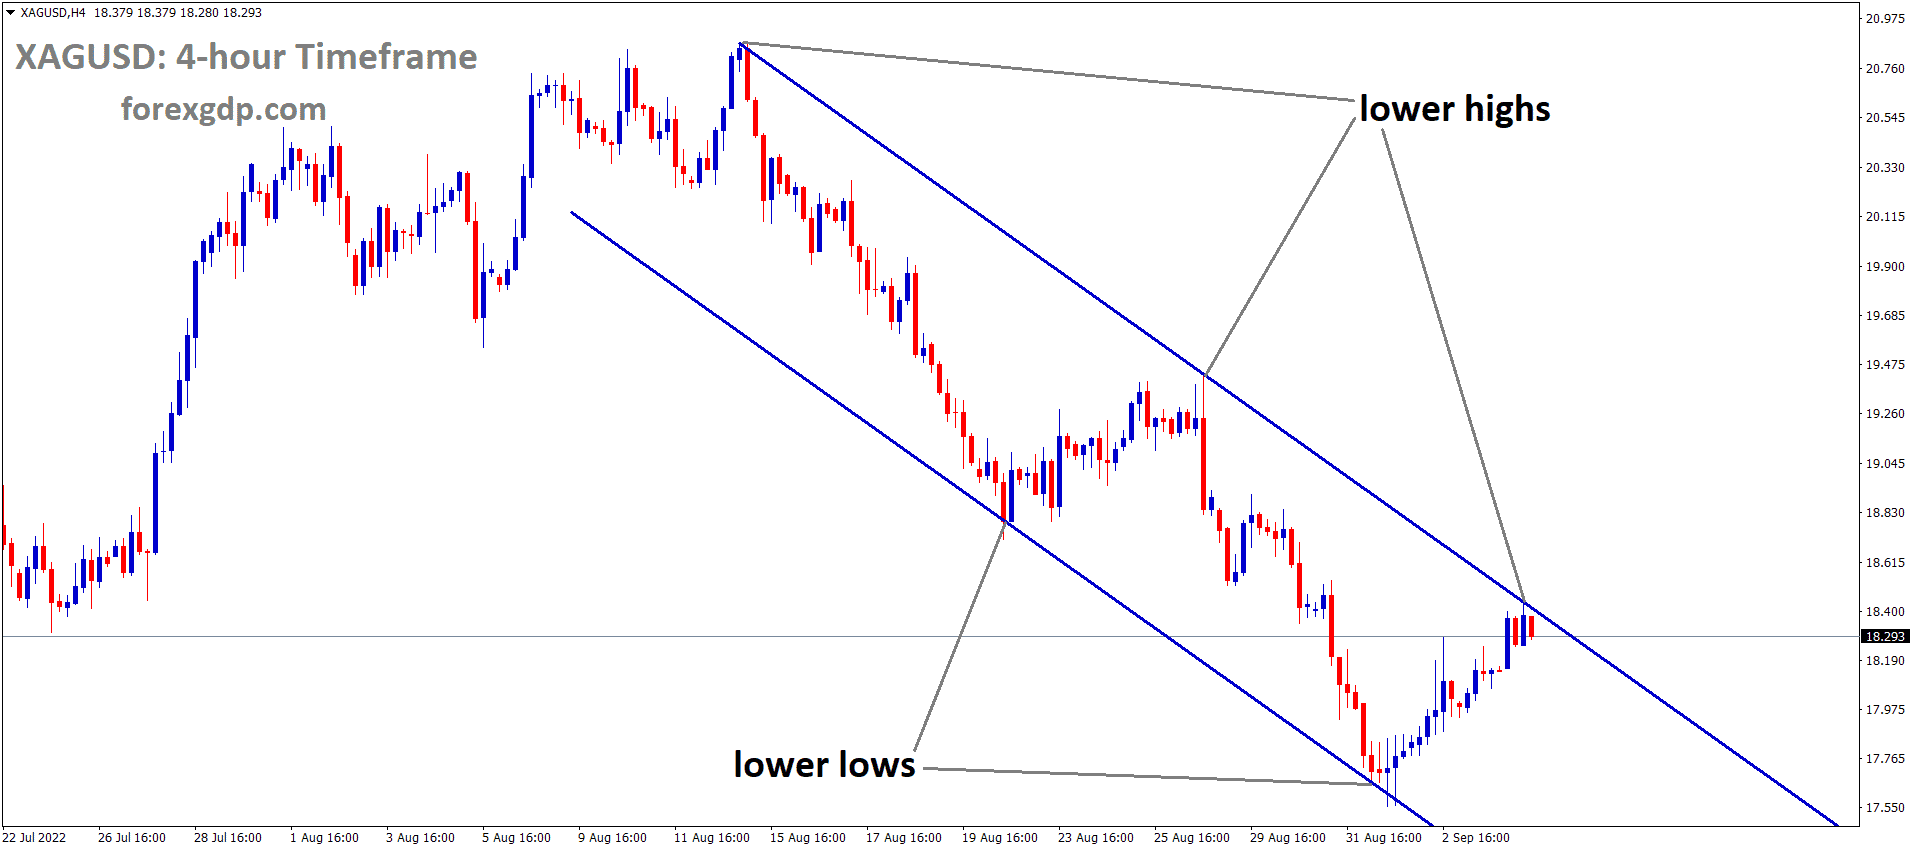 XAGUSD Silver Price is moving in the Descending channel and the market has reached the lower high area of the channel 1